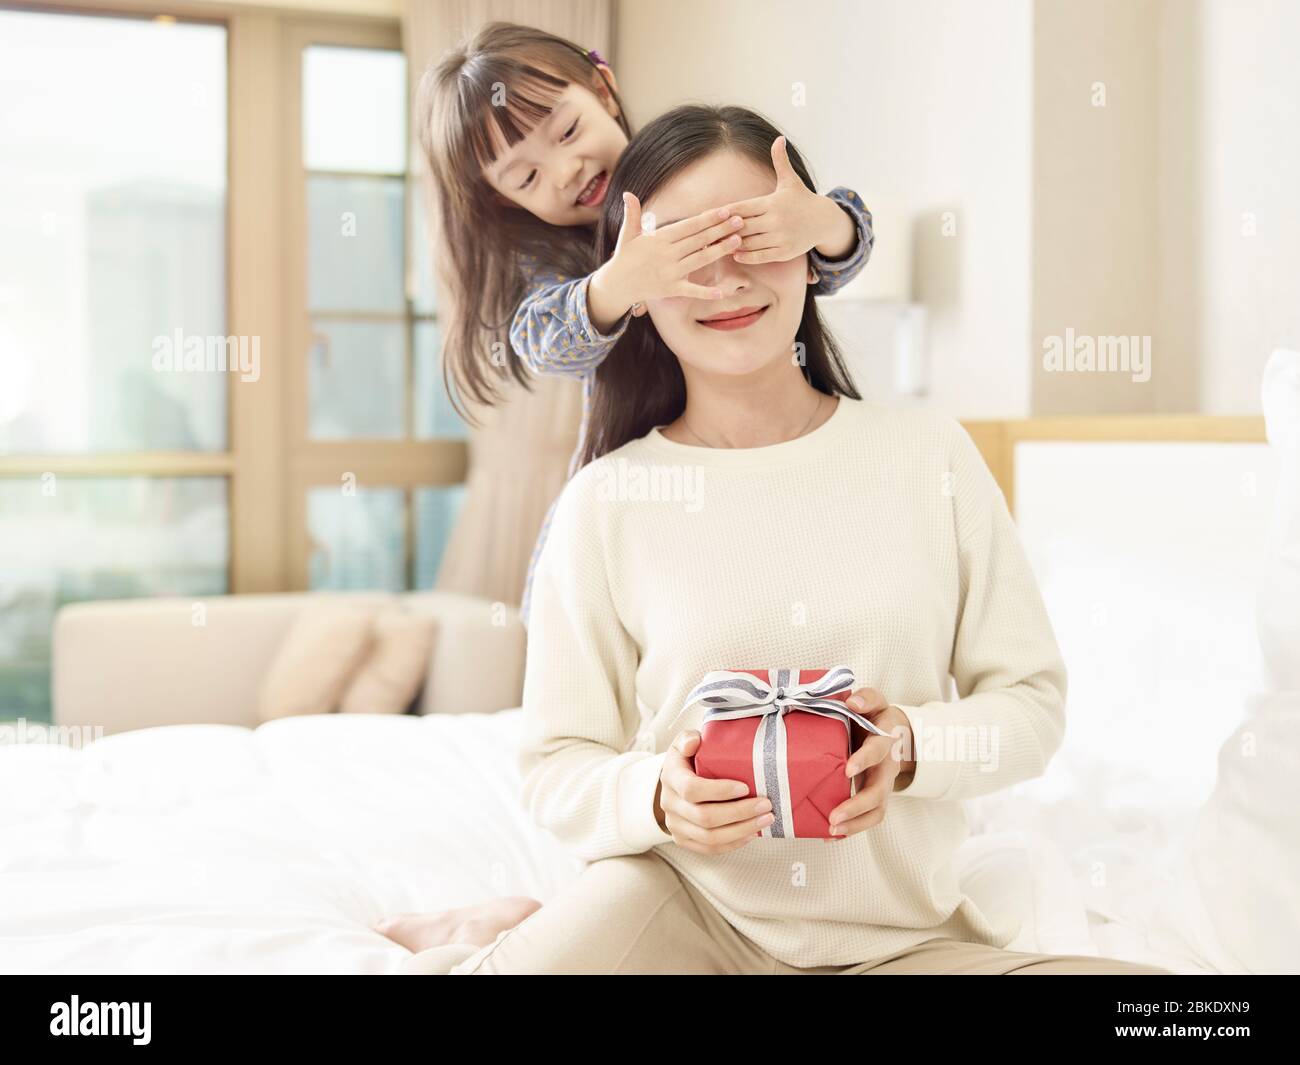 happy little asian girl giving mother a gift and covering mother's eyes with hands Stock Photo